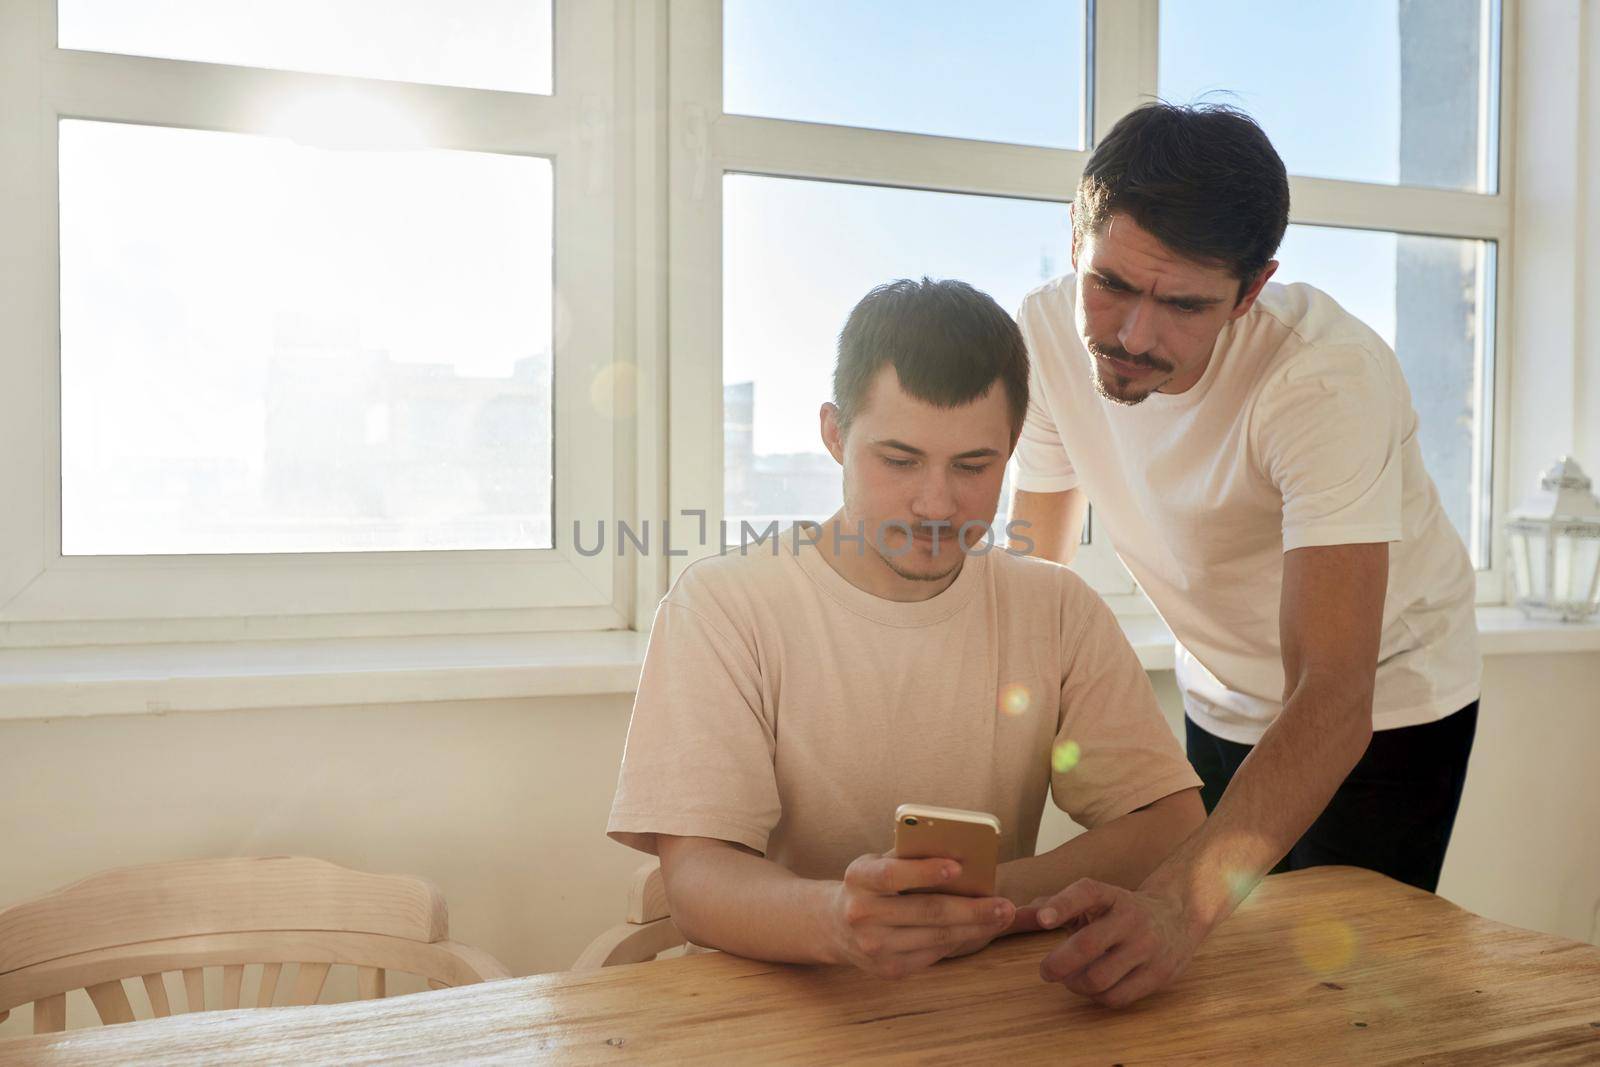 Boyfriends in similar clothes resting near table and browsing social media on smartphone against window with bright sunlight at home